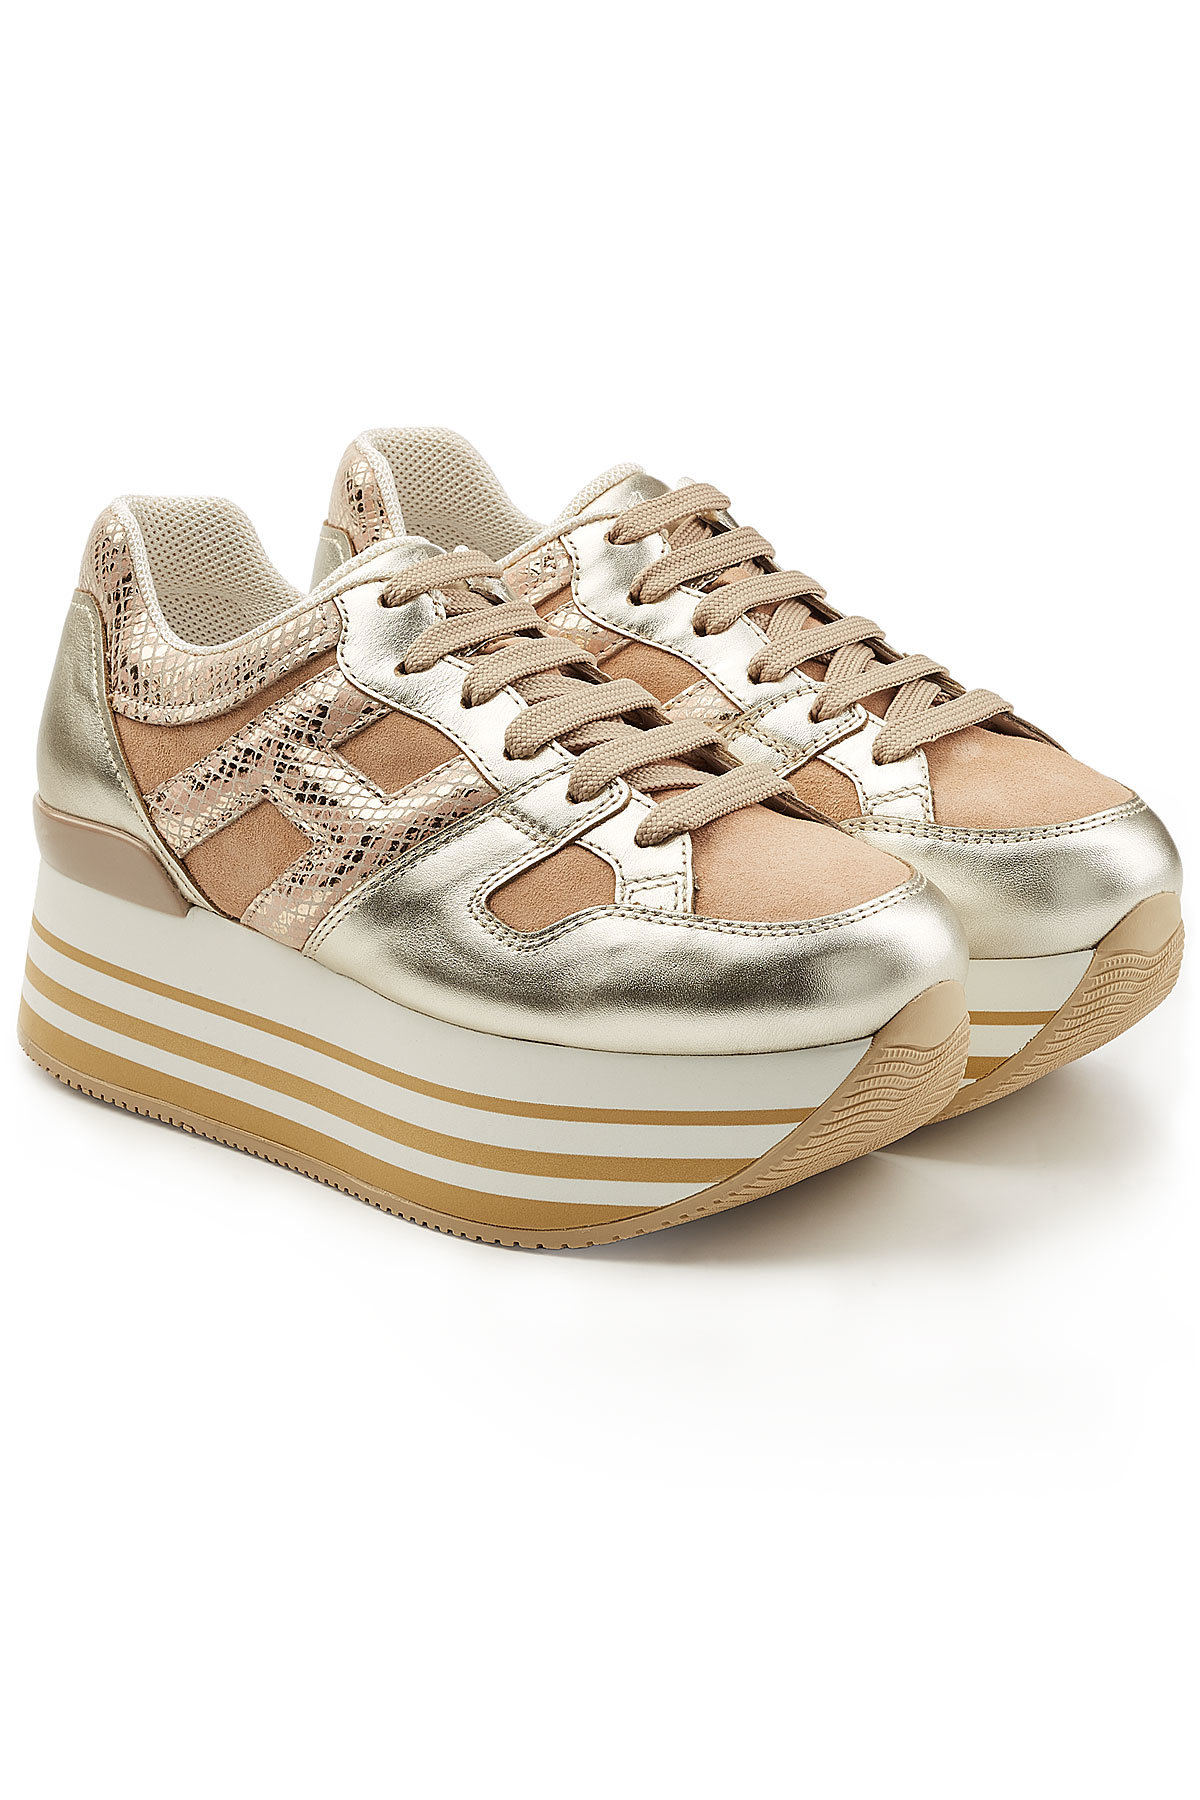 Hogan - Platform Sneakers with Leather